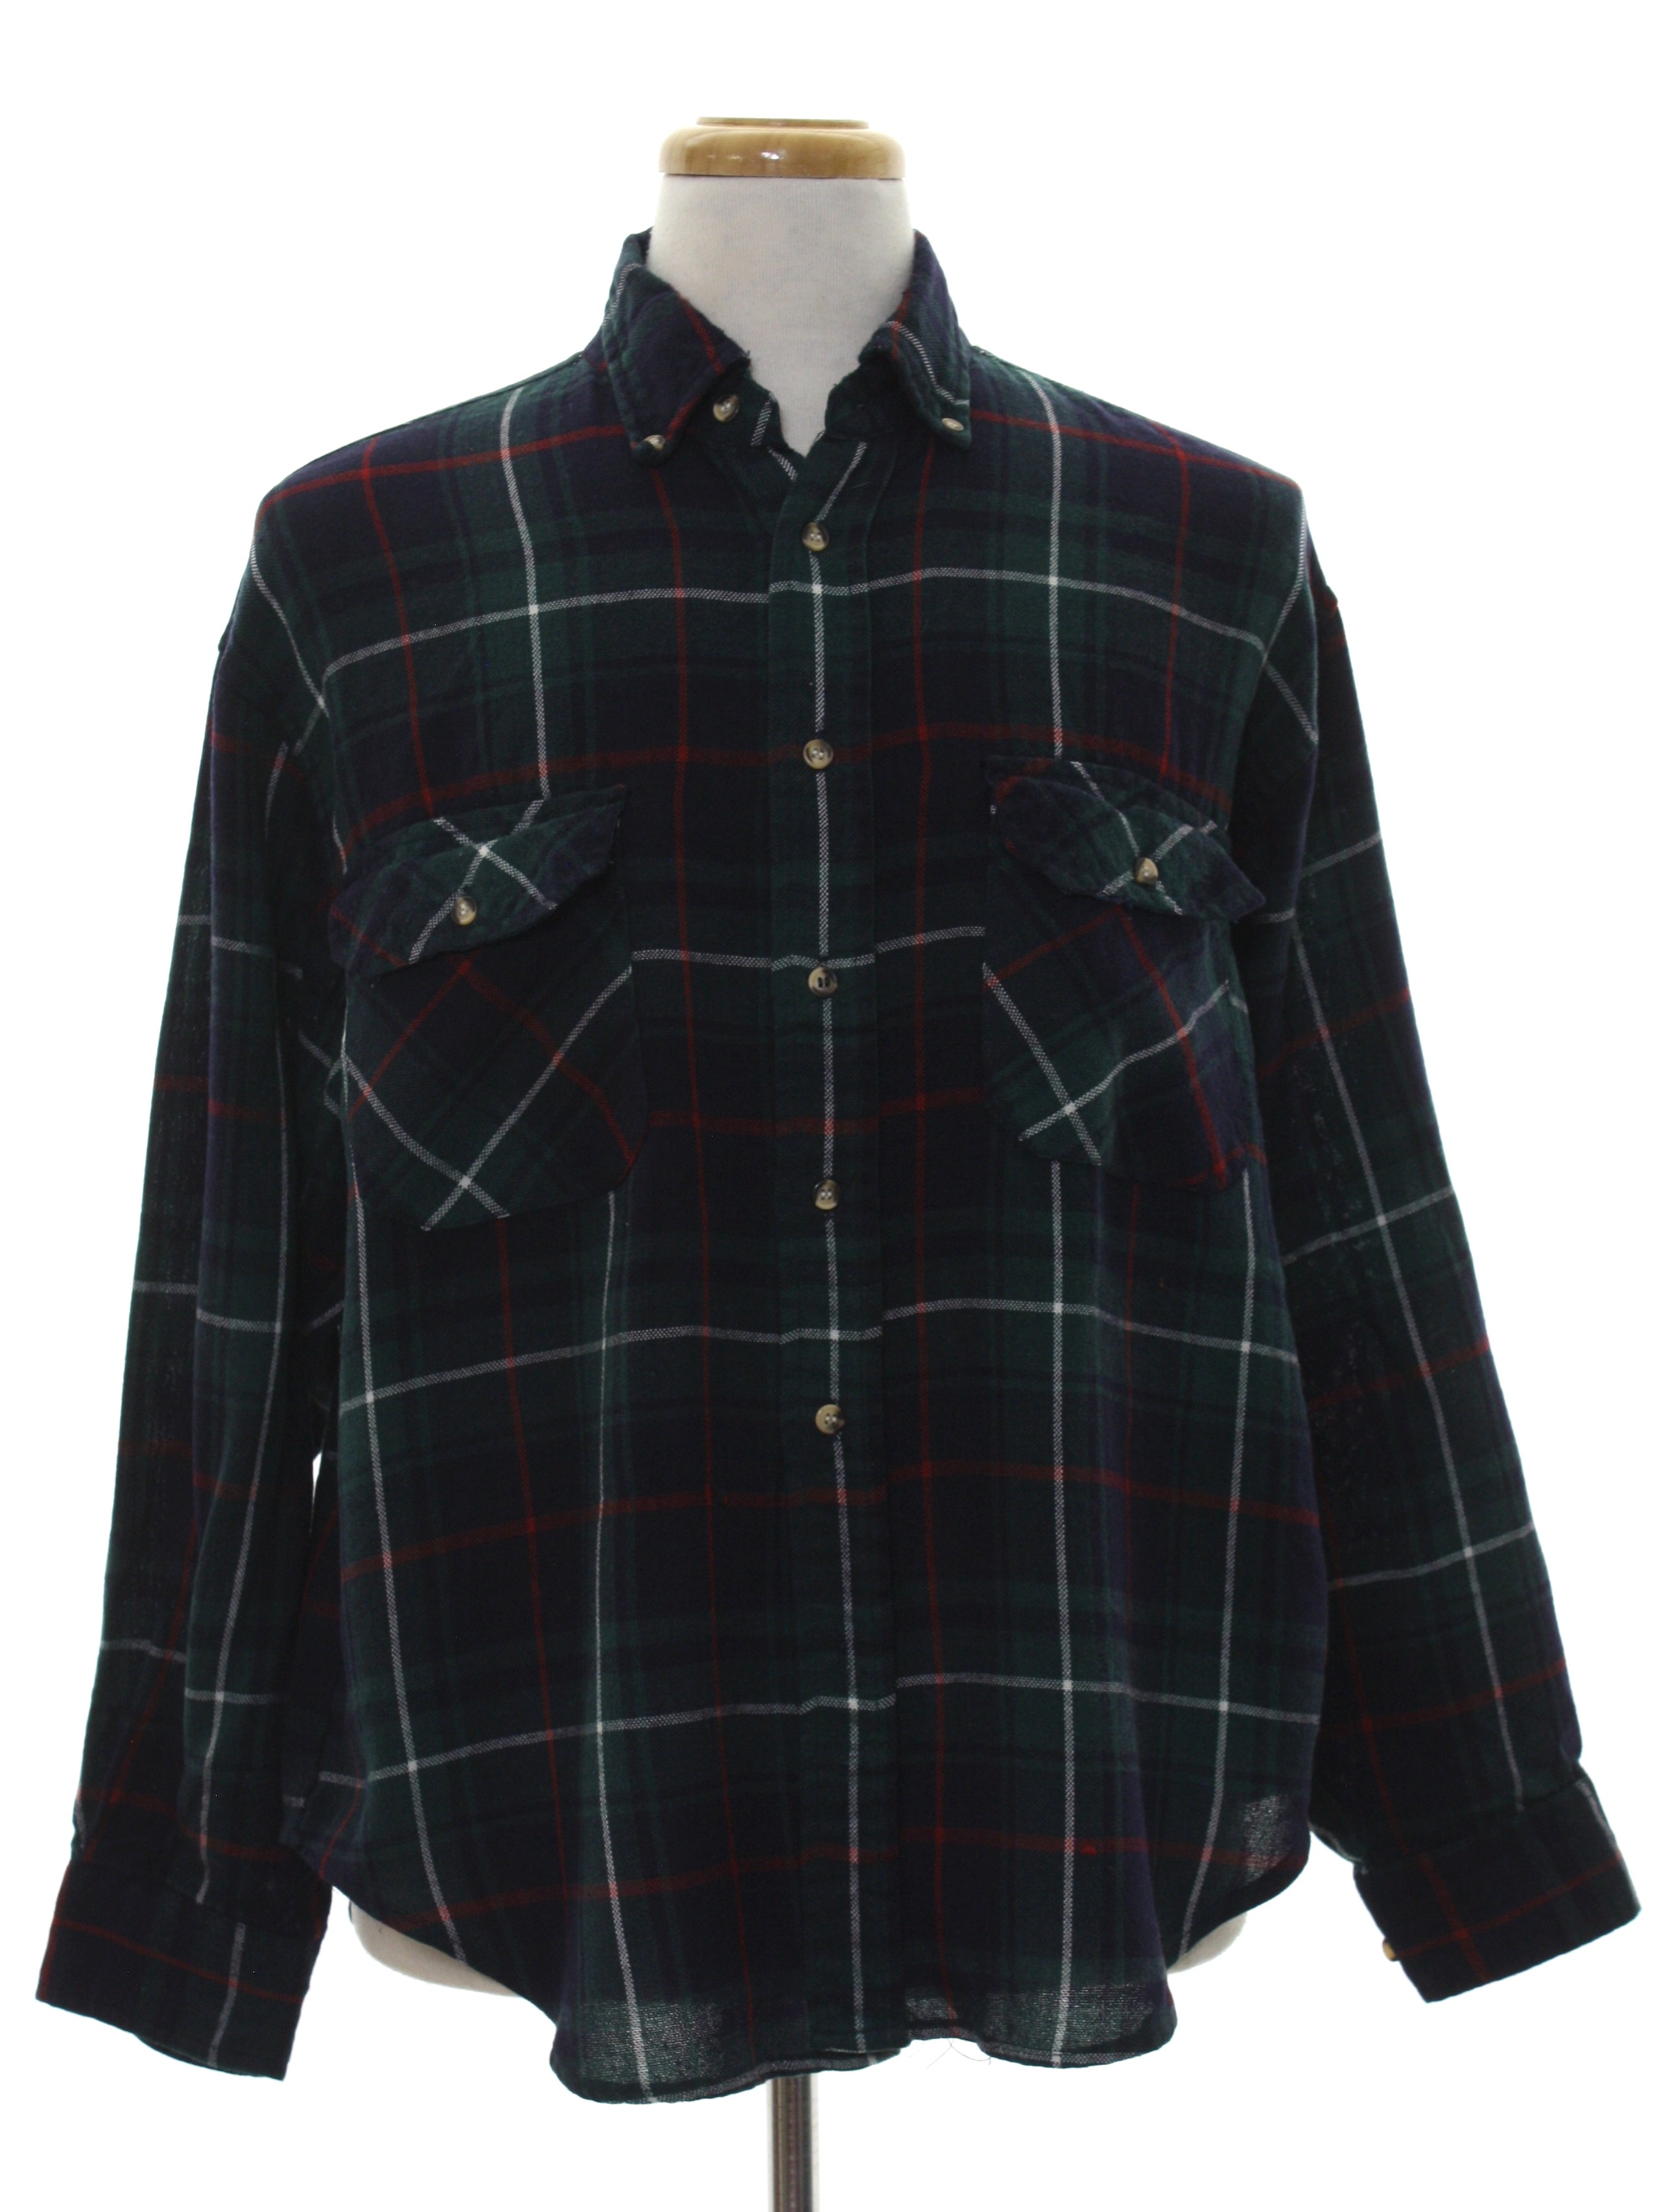 Retro 90's Shirt: 90s -Open Trails- Mens plaid pattern in shades of ...